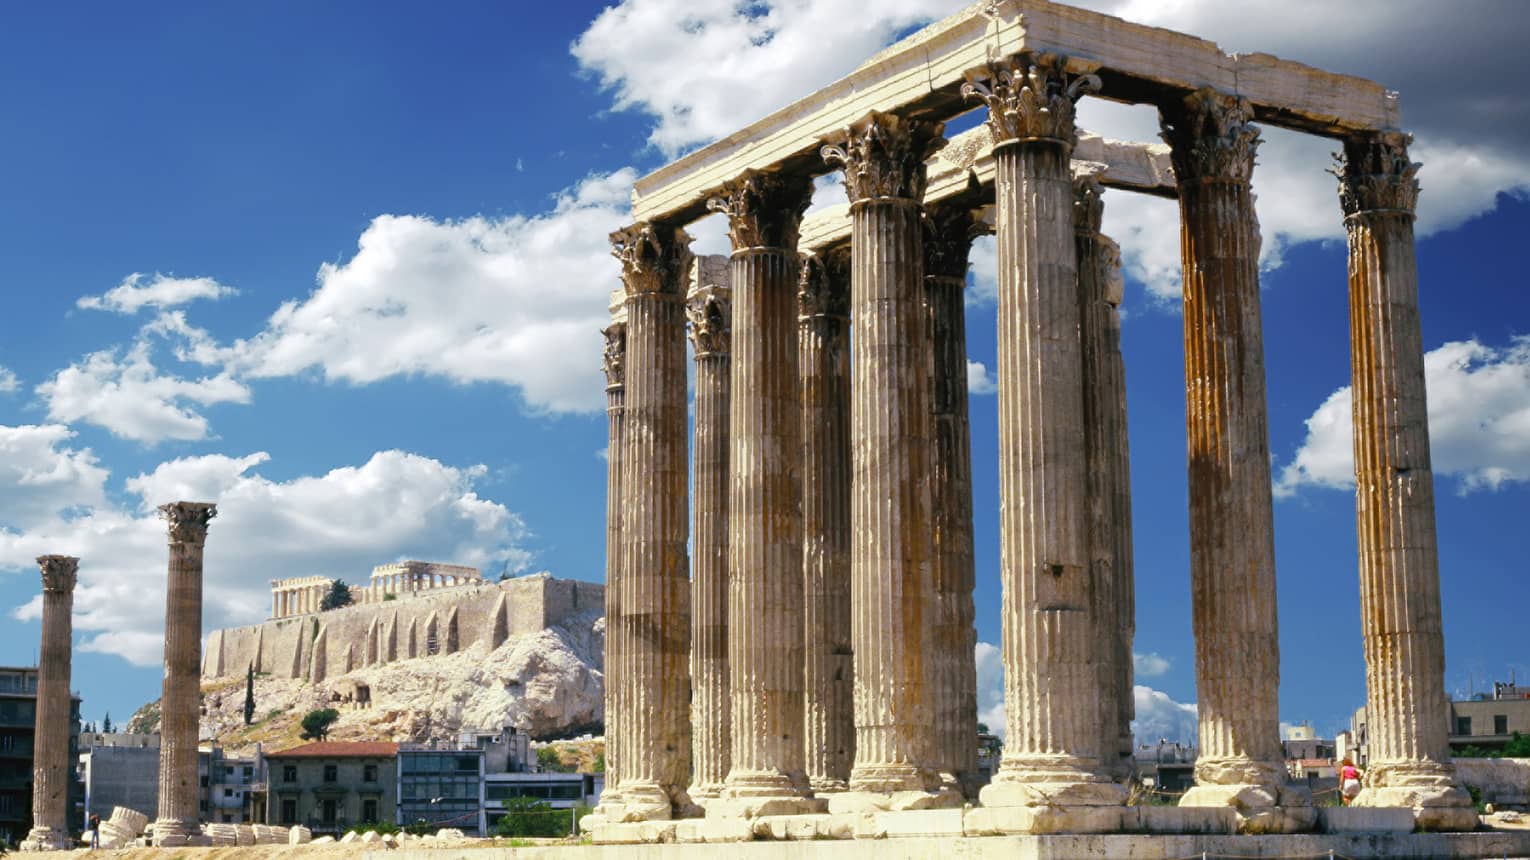 A temple with towering columns featuring intricate designs; more ruins and the Parthenon prominent in the background.